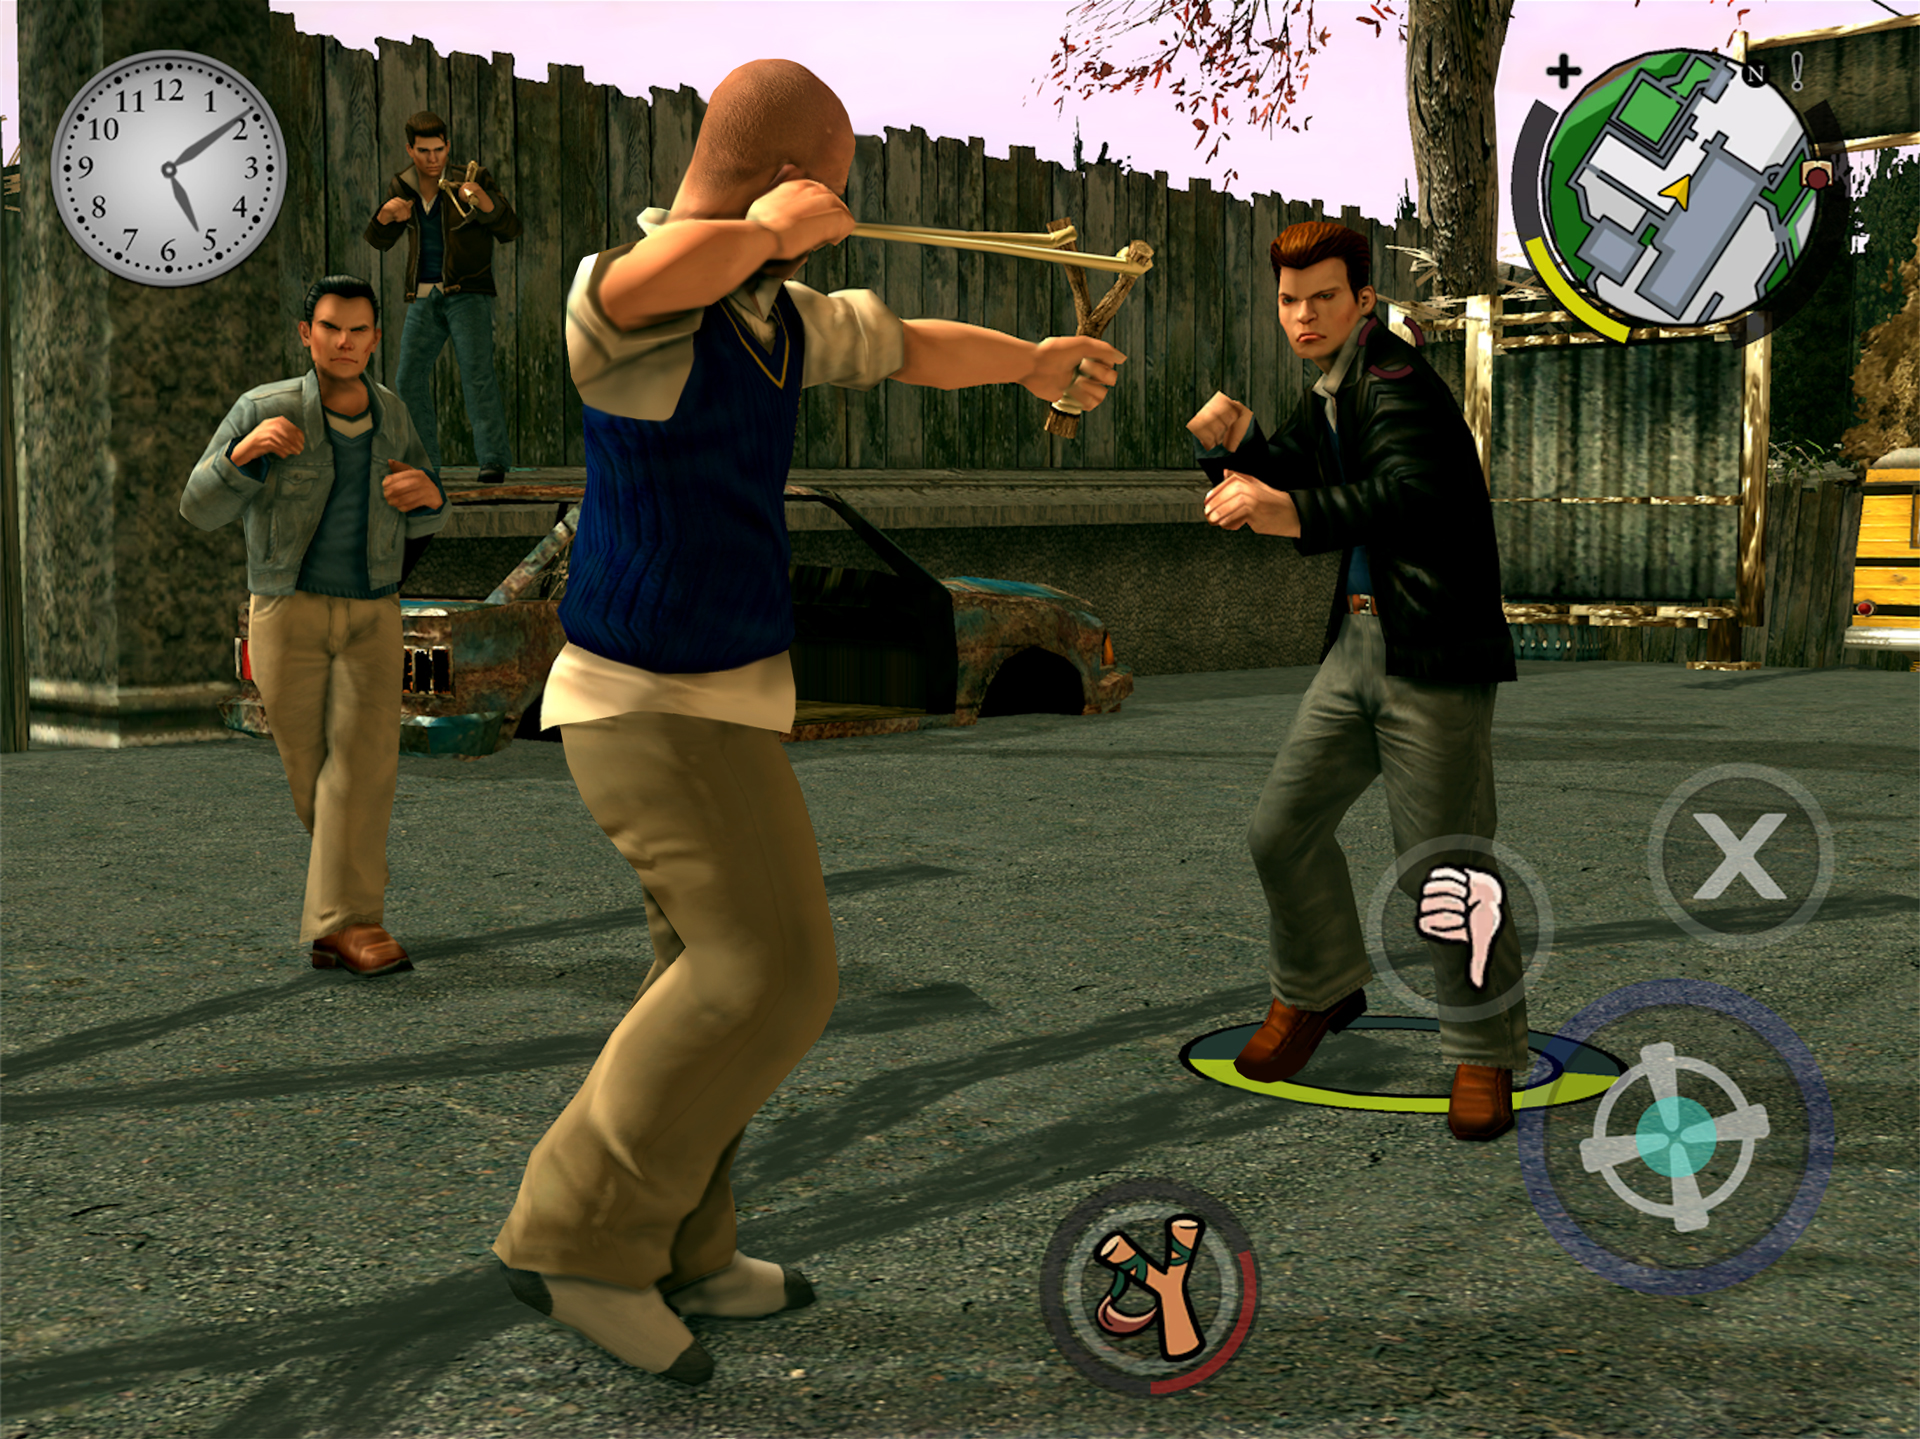 Bully 2 and 3 cancelled in favour of Red Dead Redemption, says developer